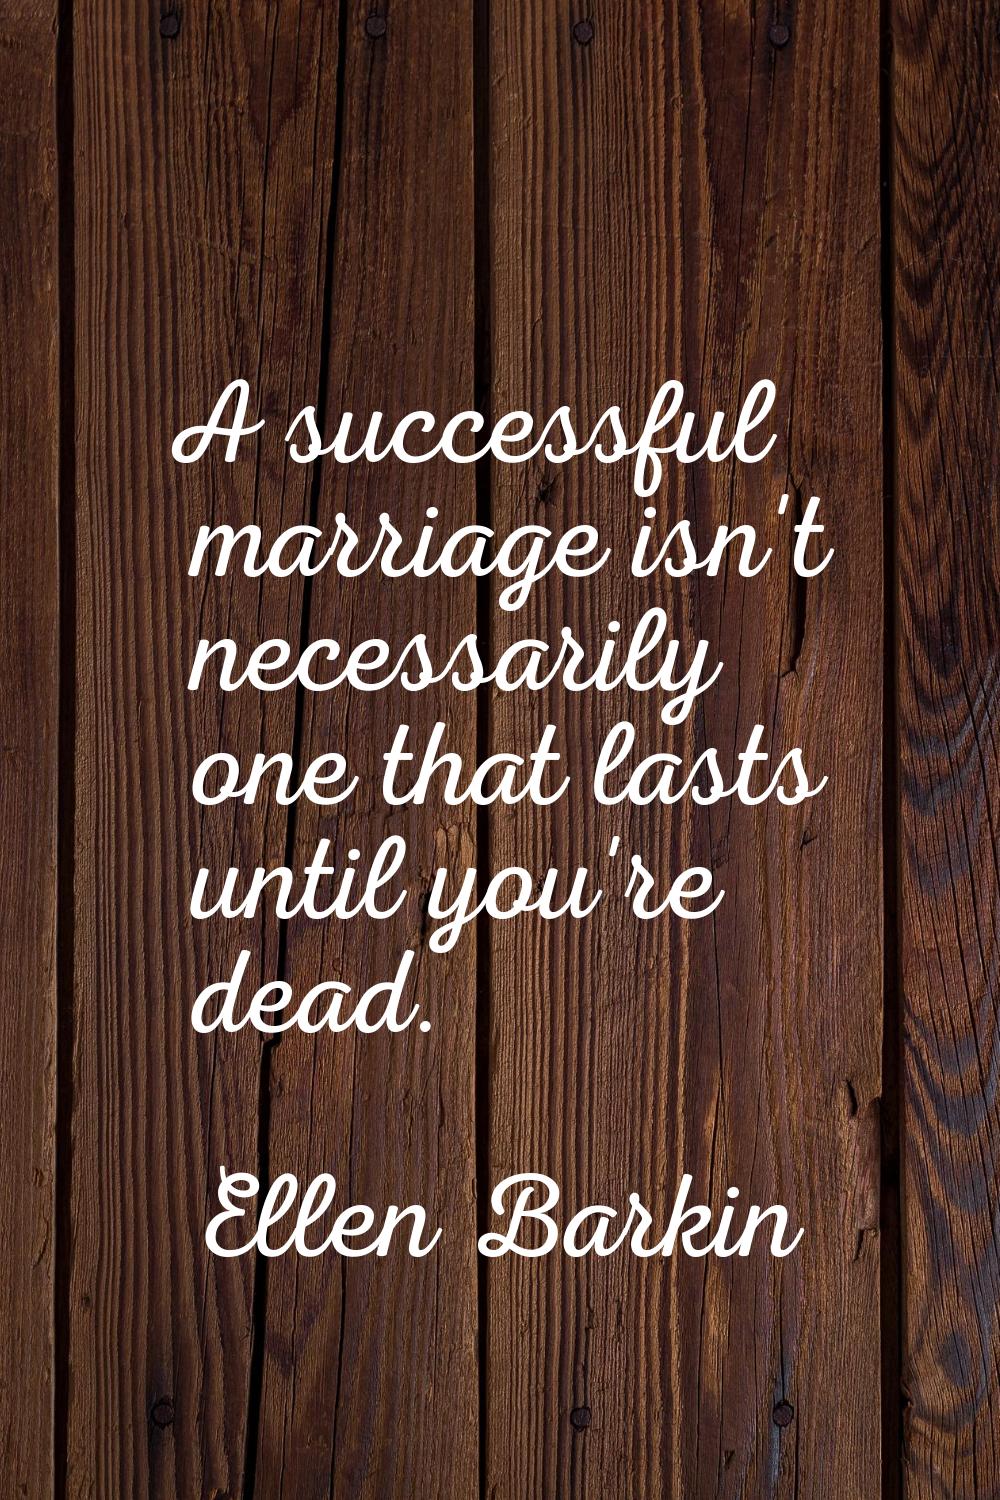 A successful marriage isn't necessarily one that lasts until you're dead.